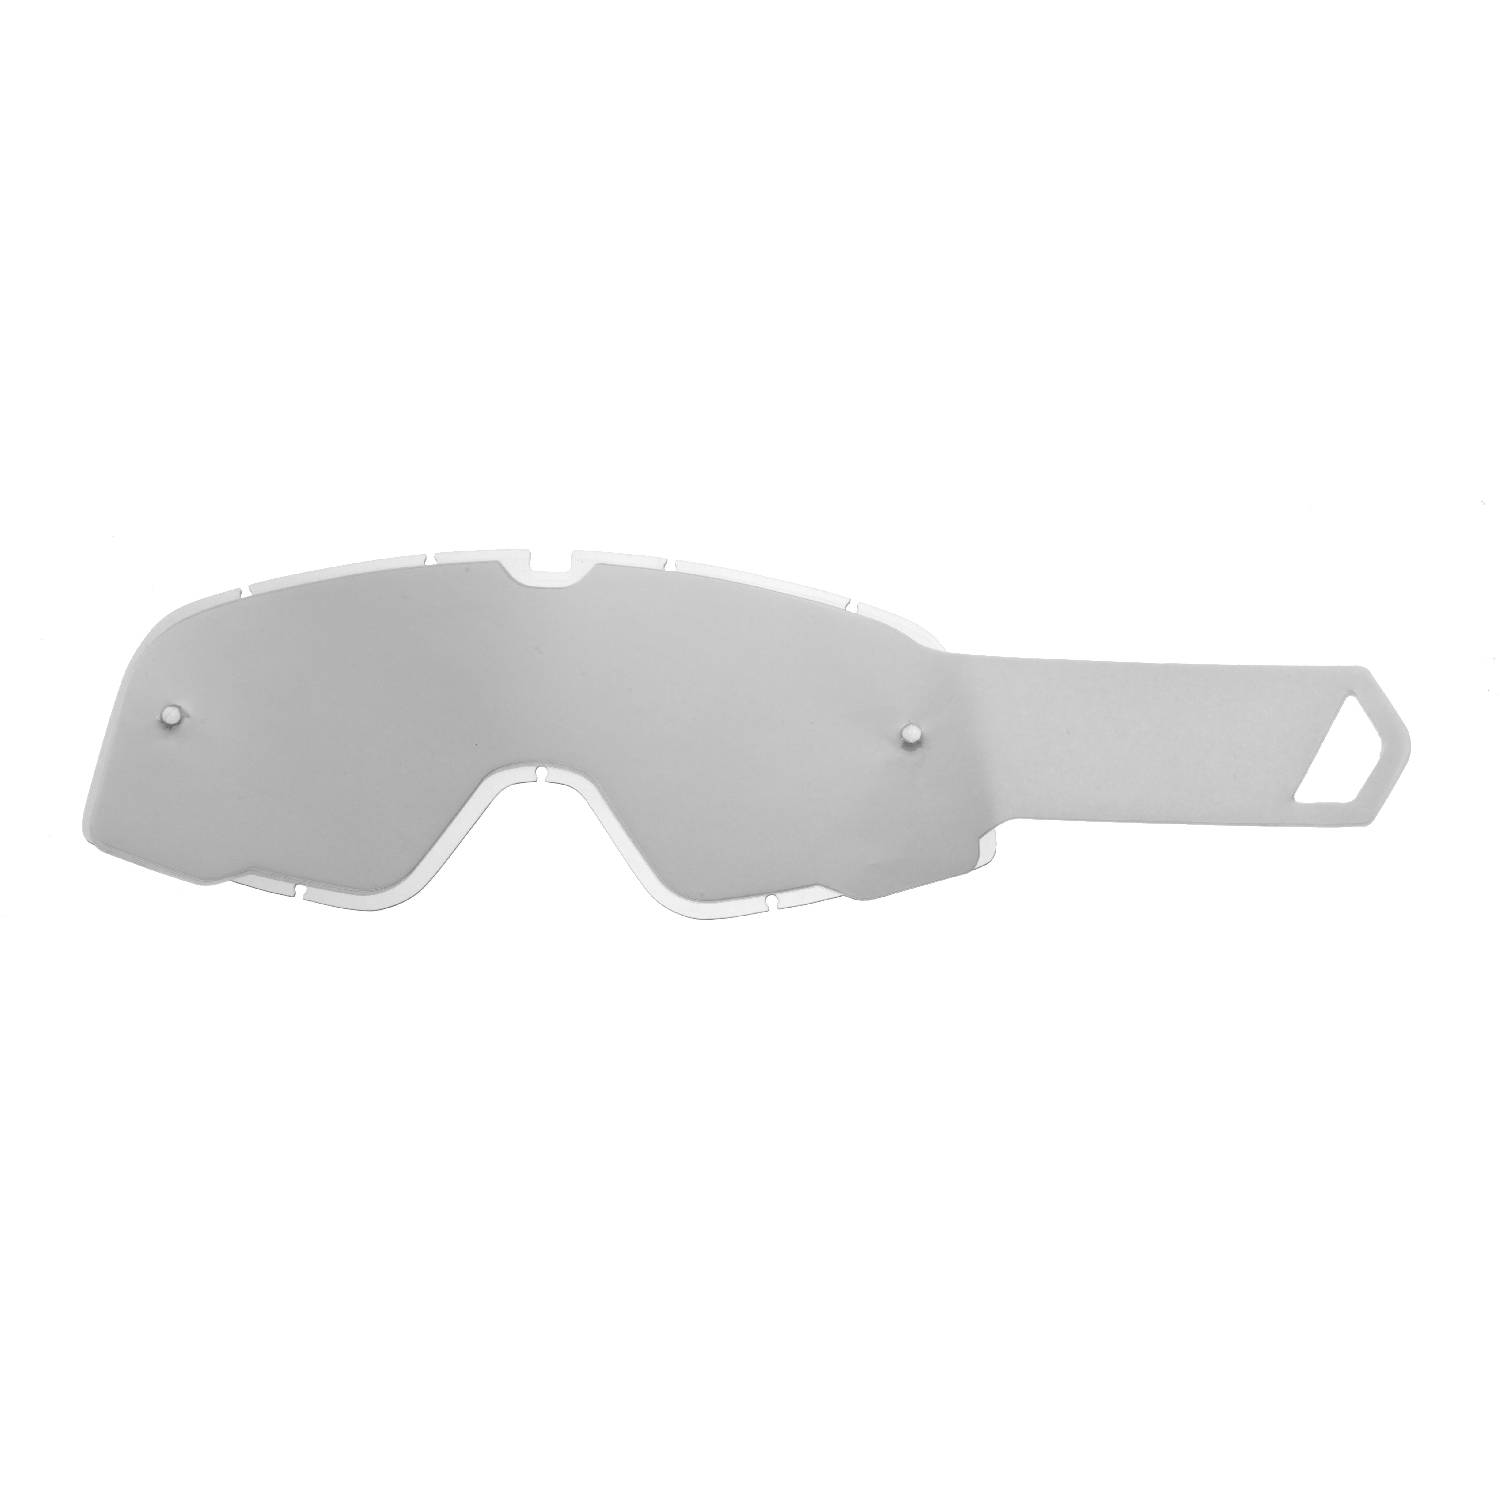 Clear lens + 10 Tear-OFFS (combo) compatible for 100% Barstow goggle